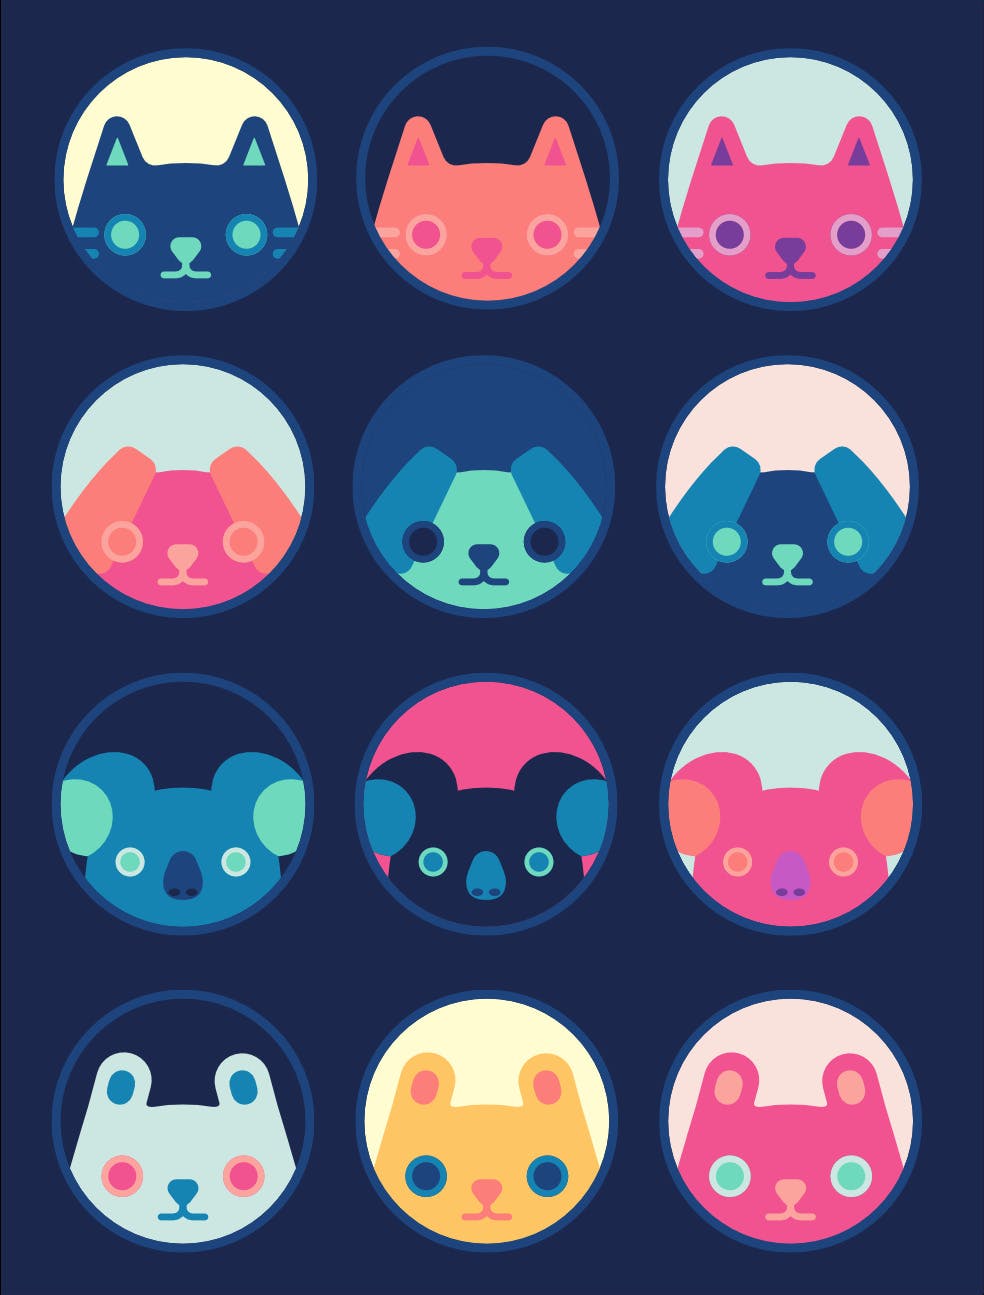 game character icons: a cat, a dog, a koala, and a rabbit